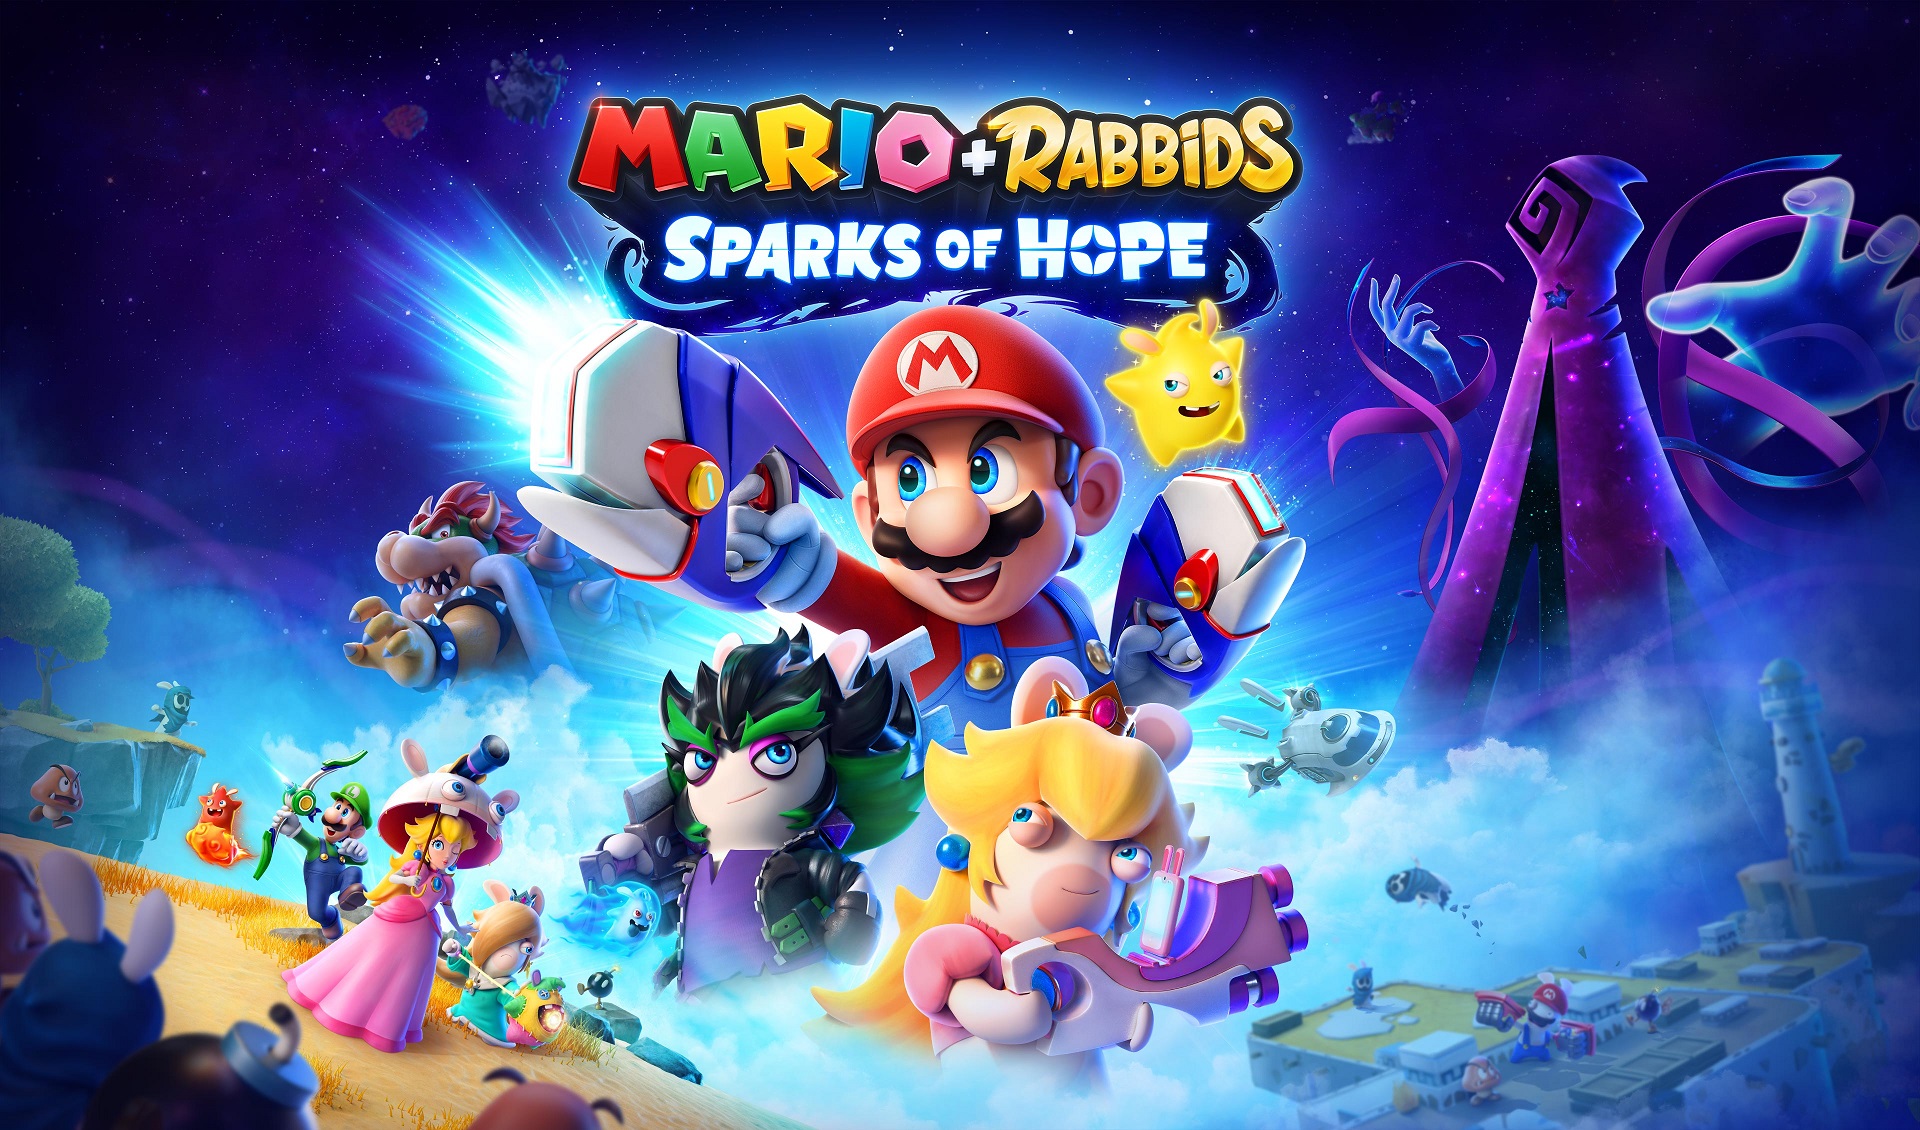 Mario + Rabbids: Sparks of Hope reaches for the stars